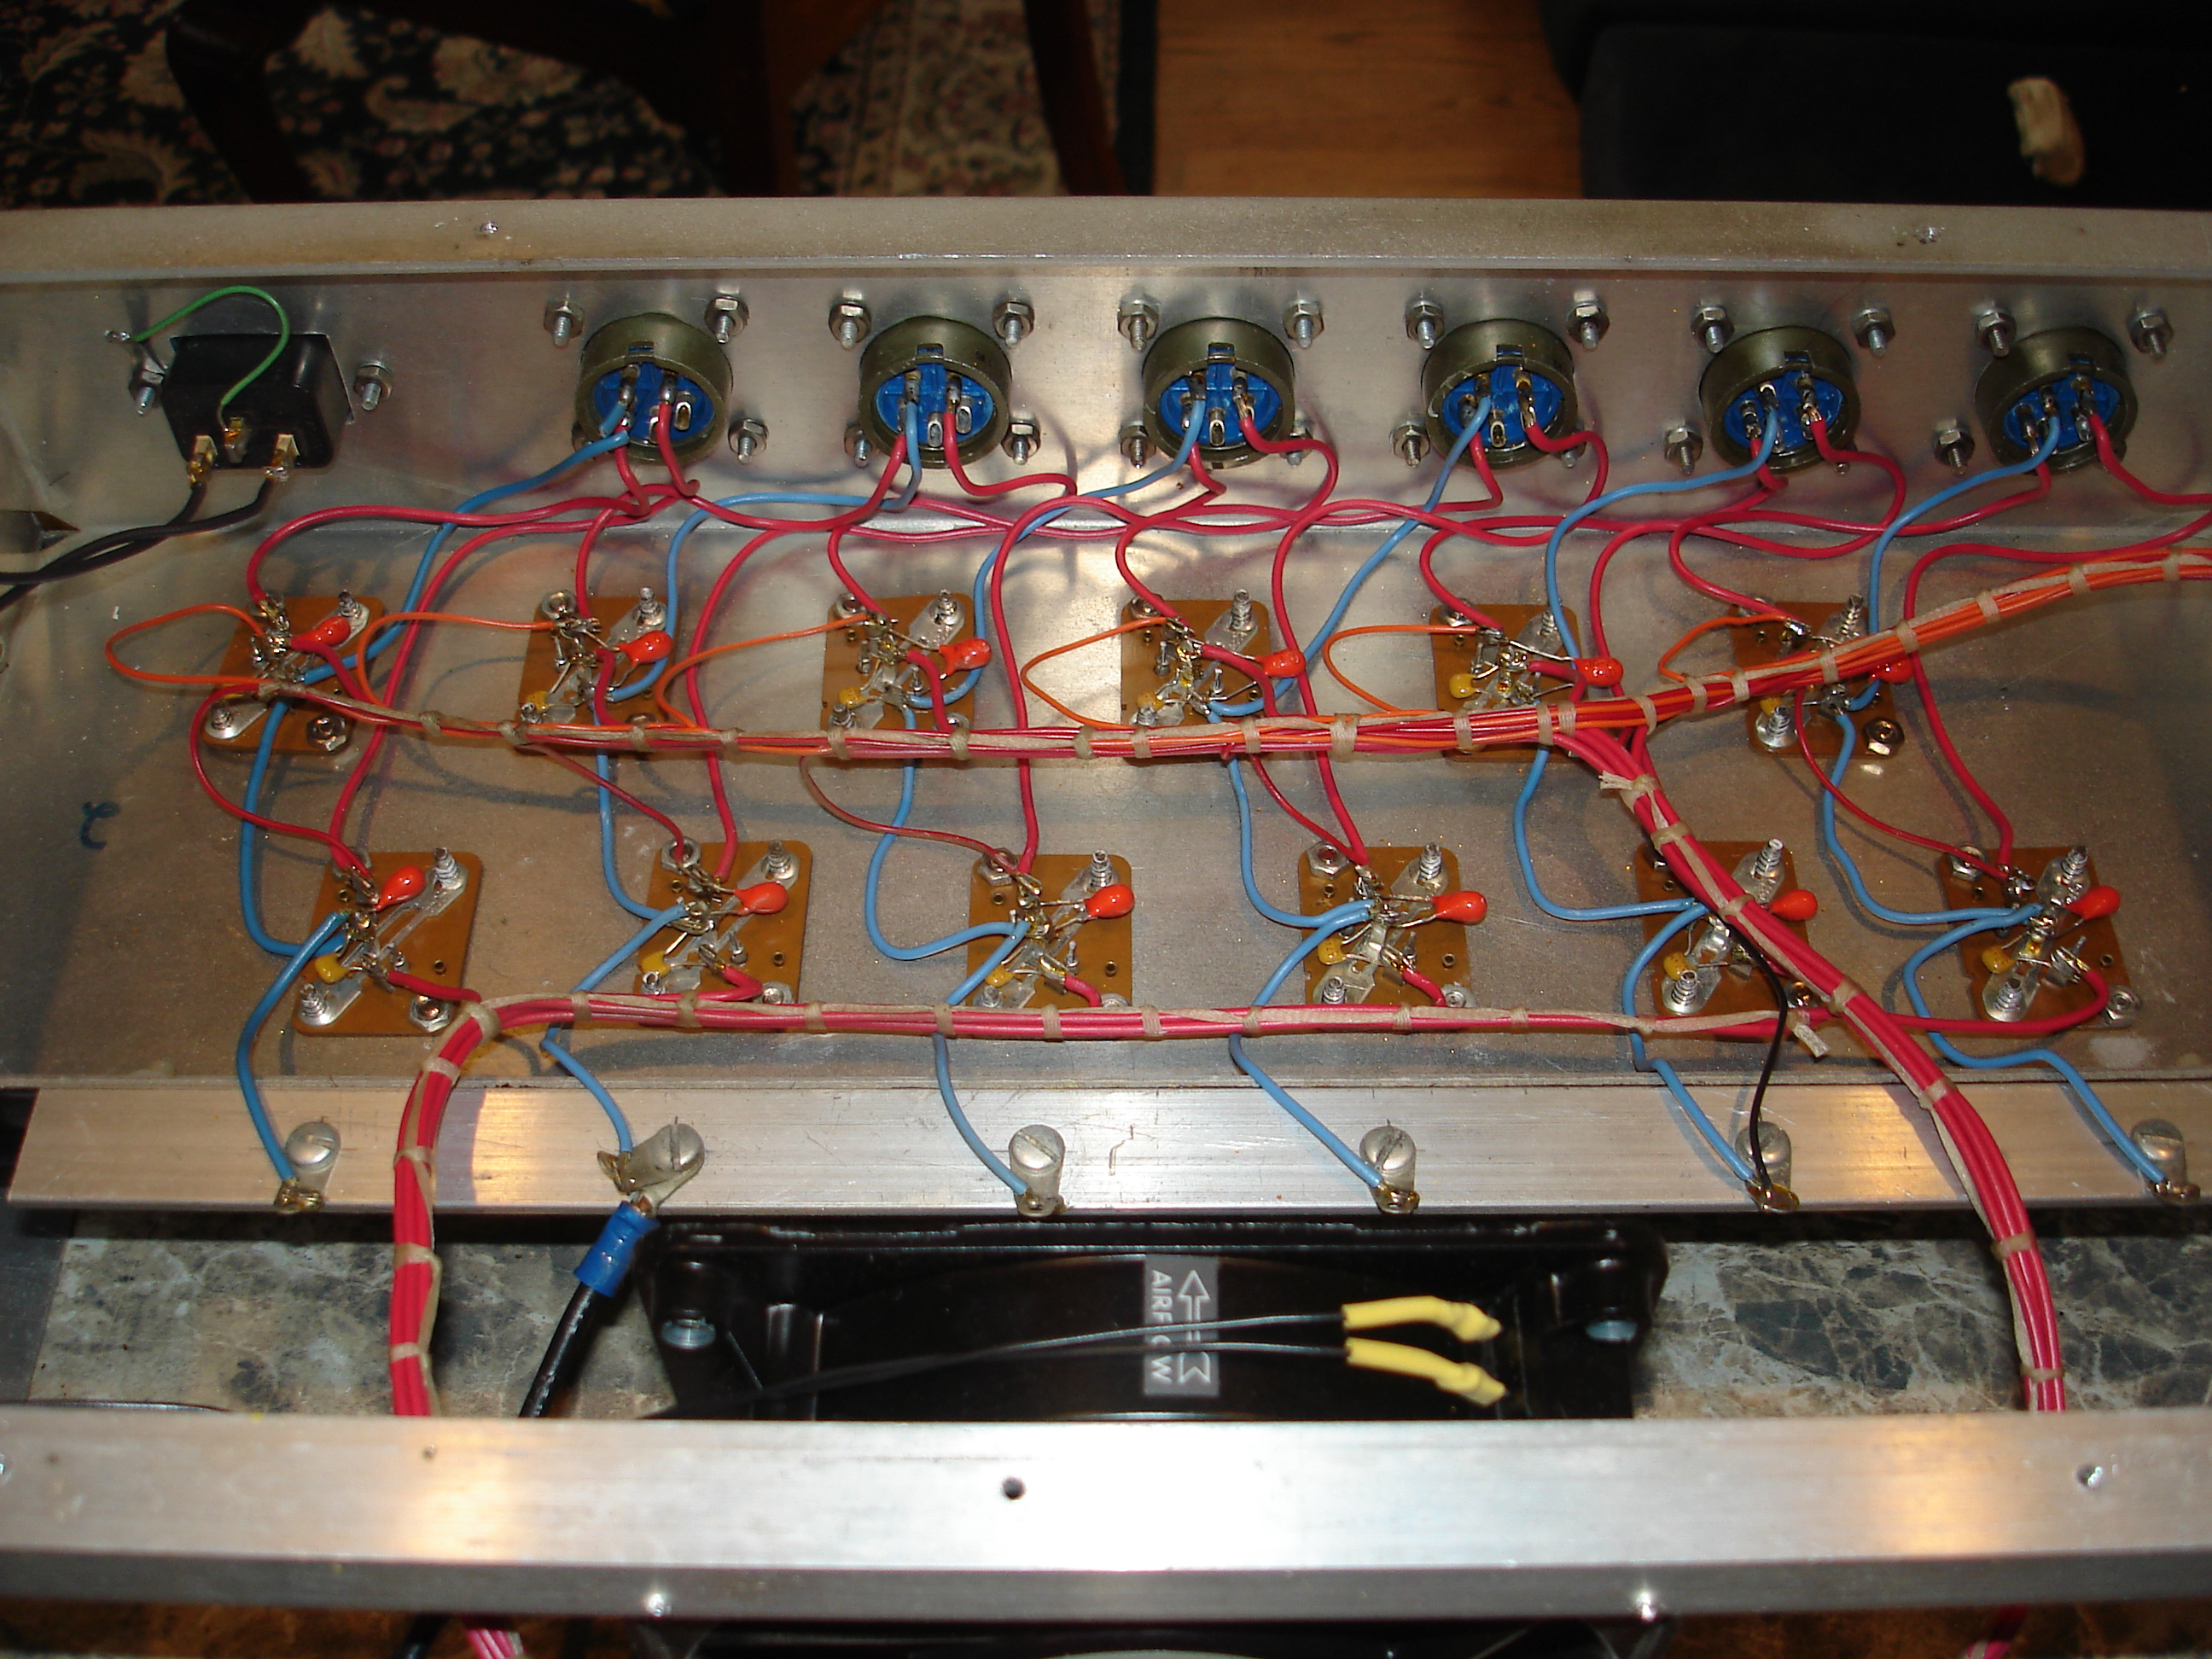 A DC Power Supply for Rack Gear